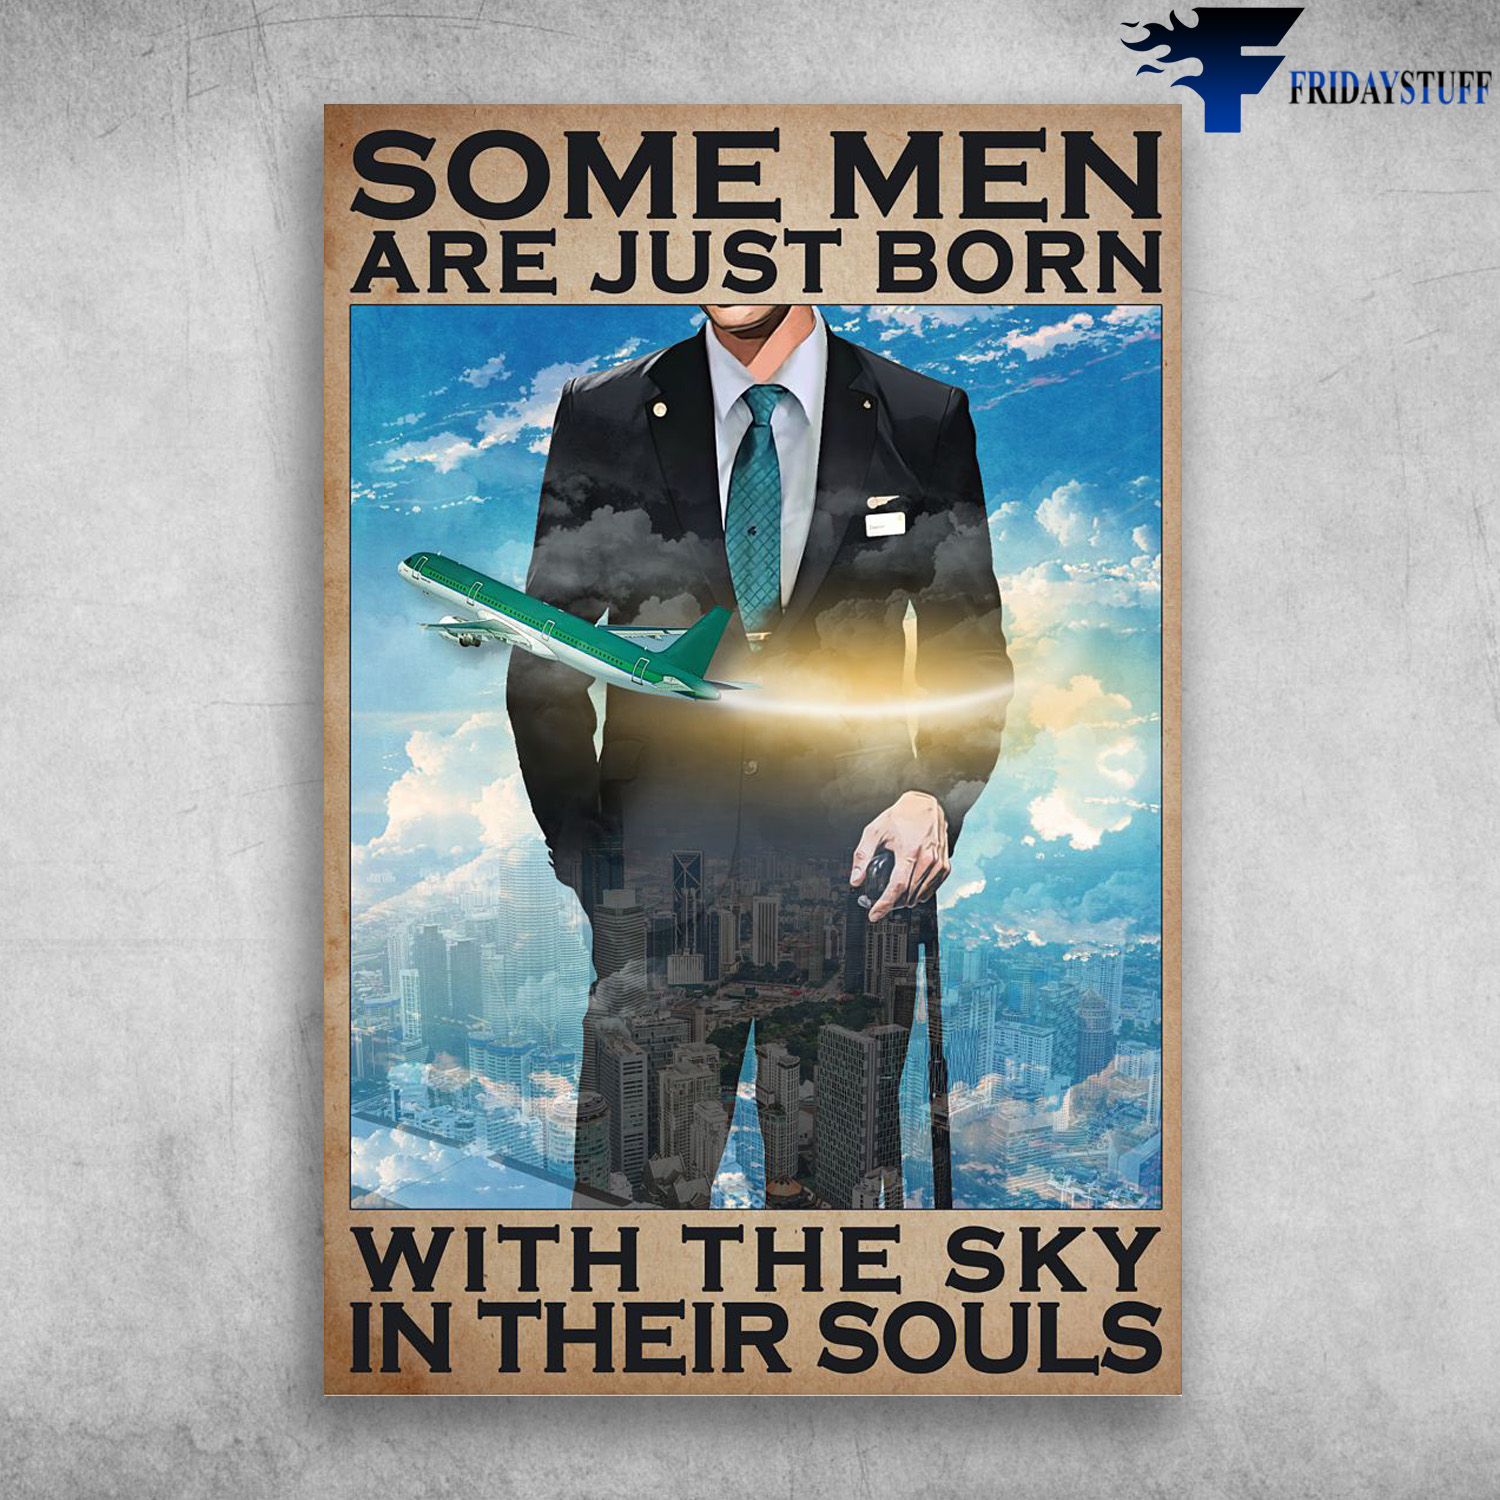 Man Flight Attendant - Some Men Are Just Born With The Sky In Their Souls